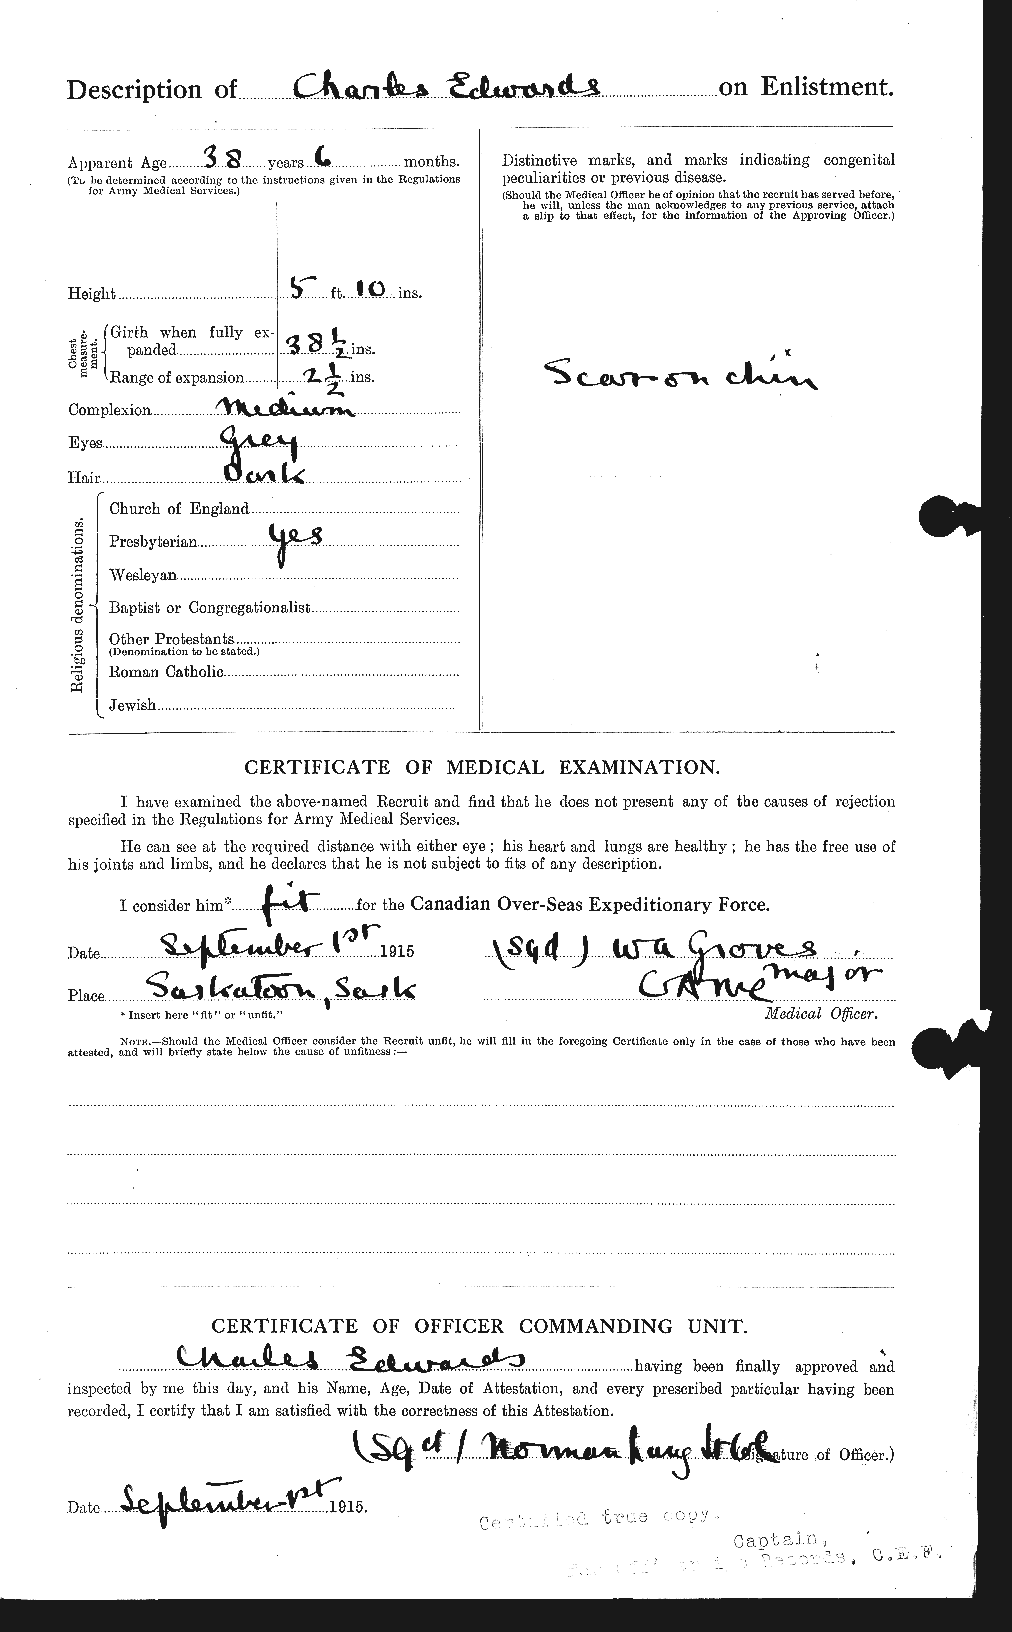 Personnel Records of the First World War - CEF 307831b